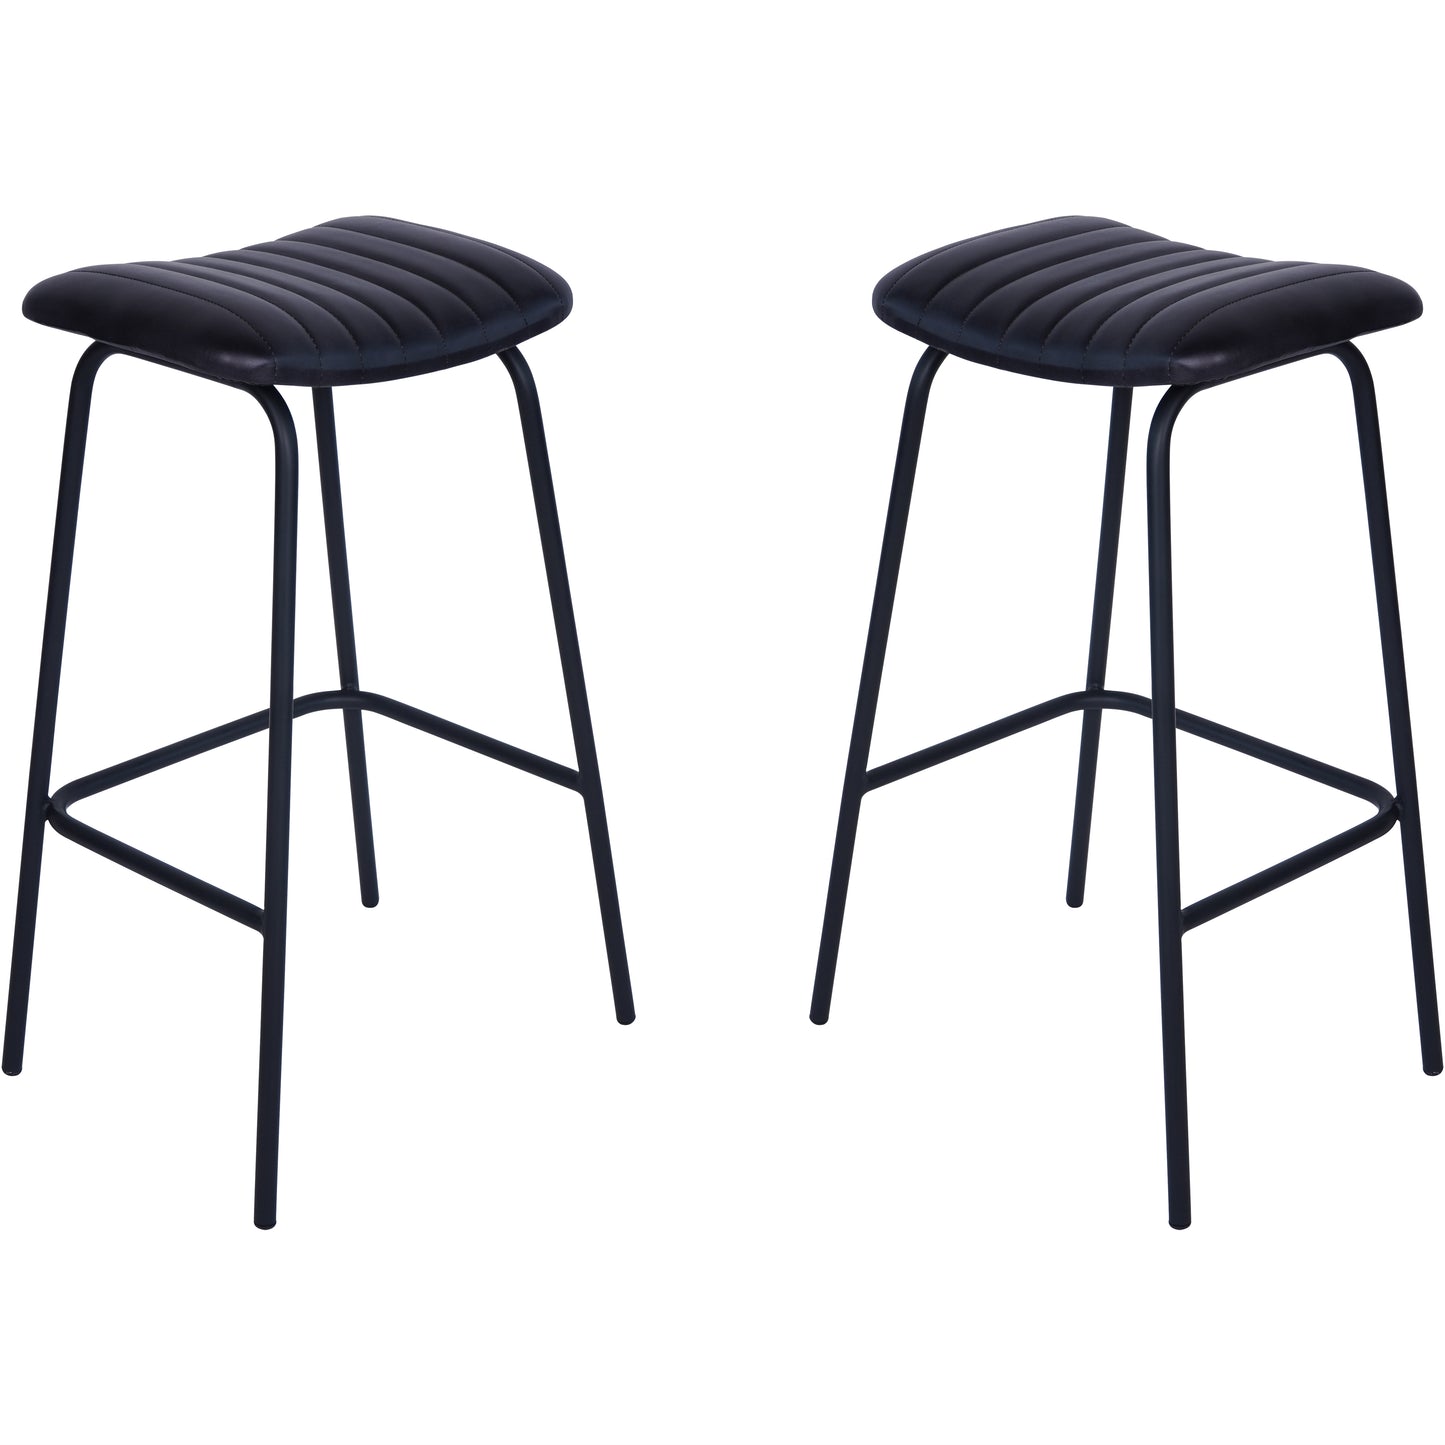 Pair of Arthur Leather Bar Stools in Charcoal